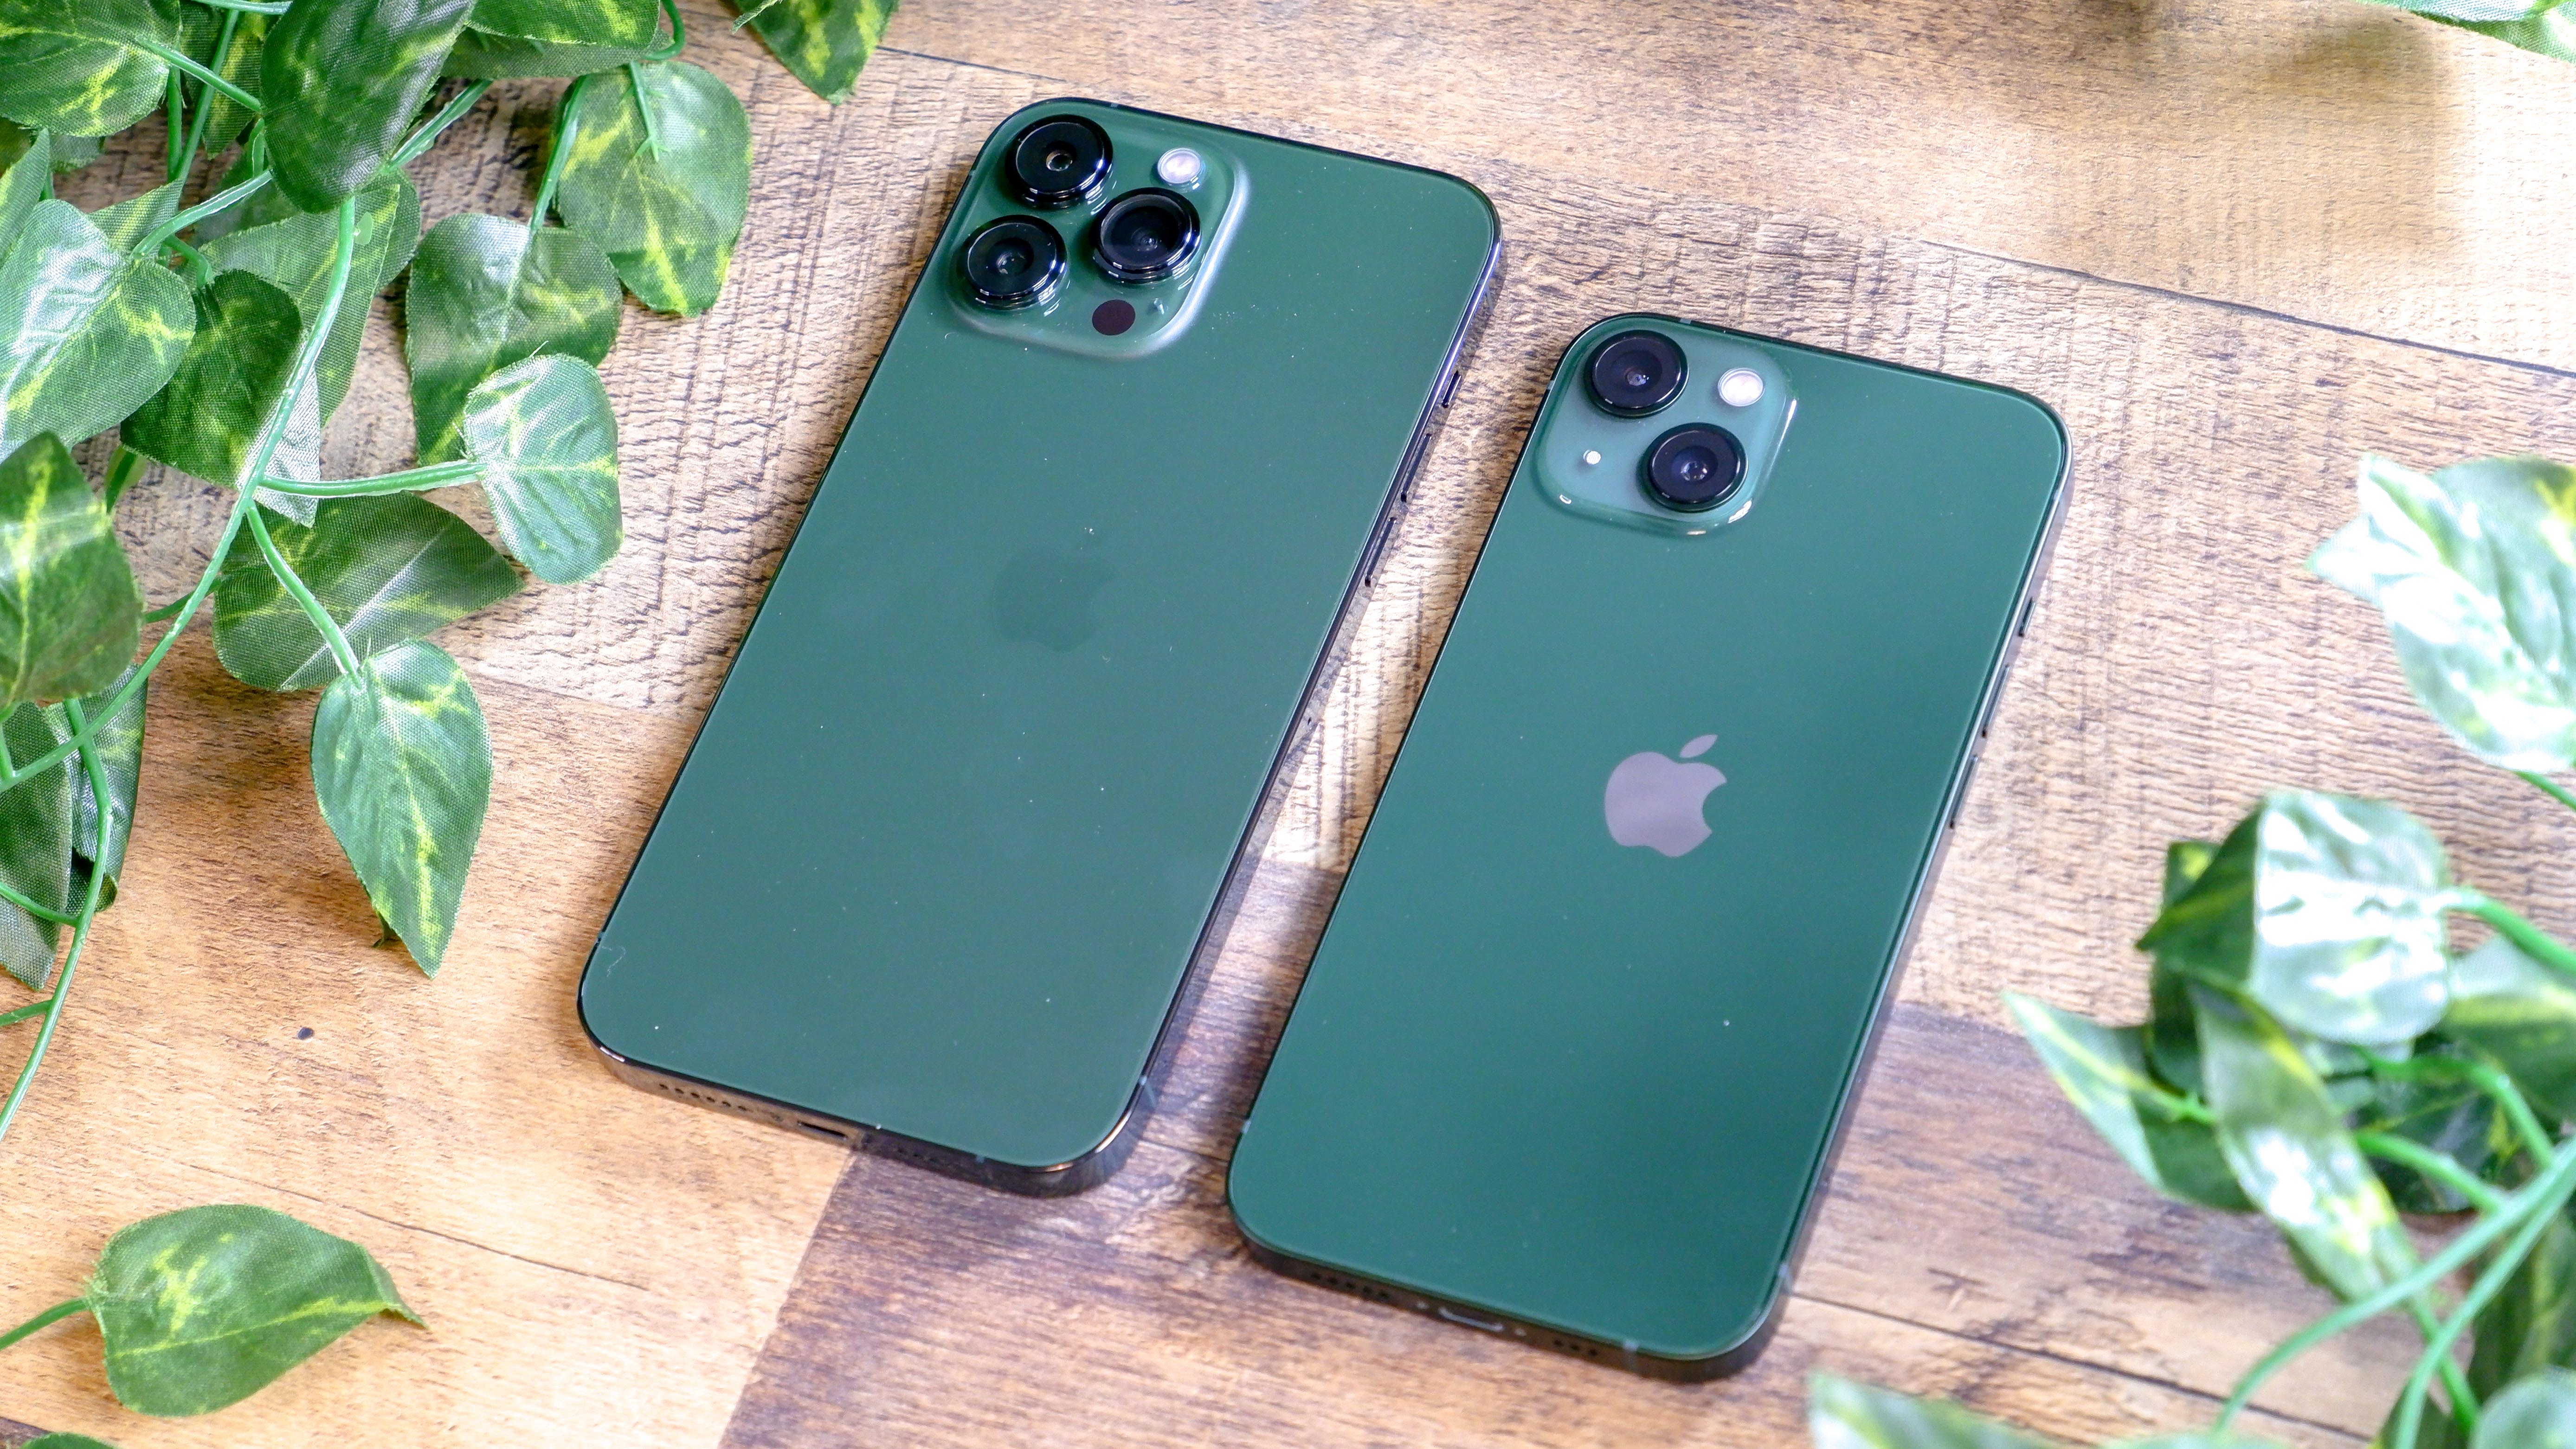 iPhone 13 and iPhone 13 Pro Max in green